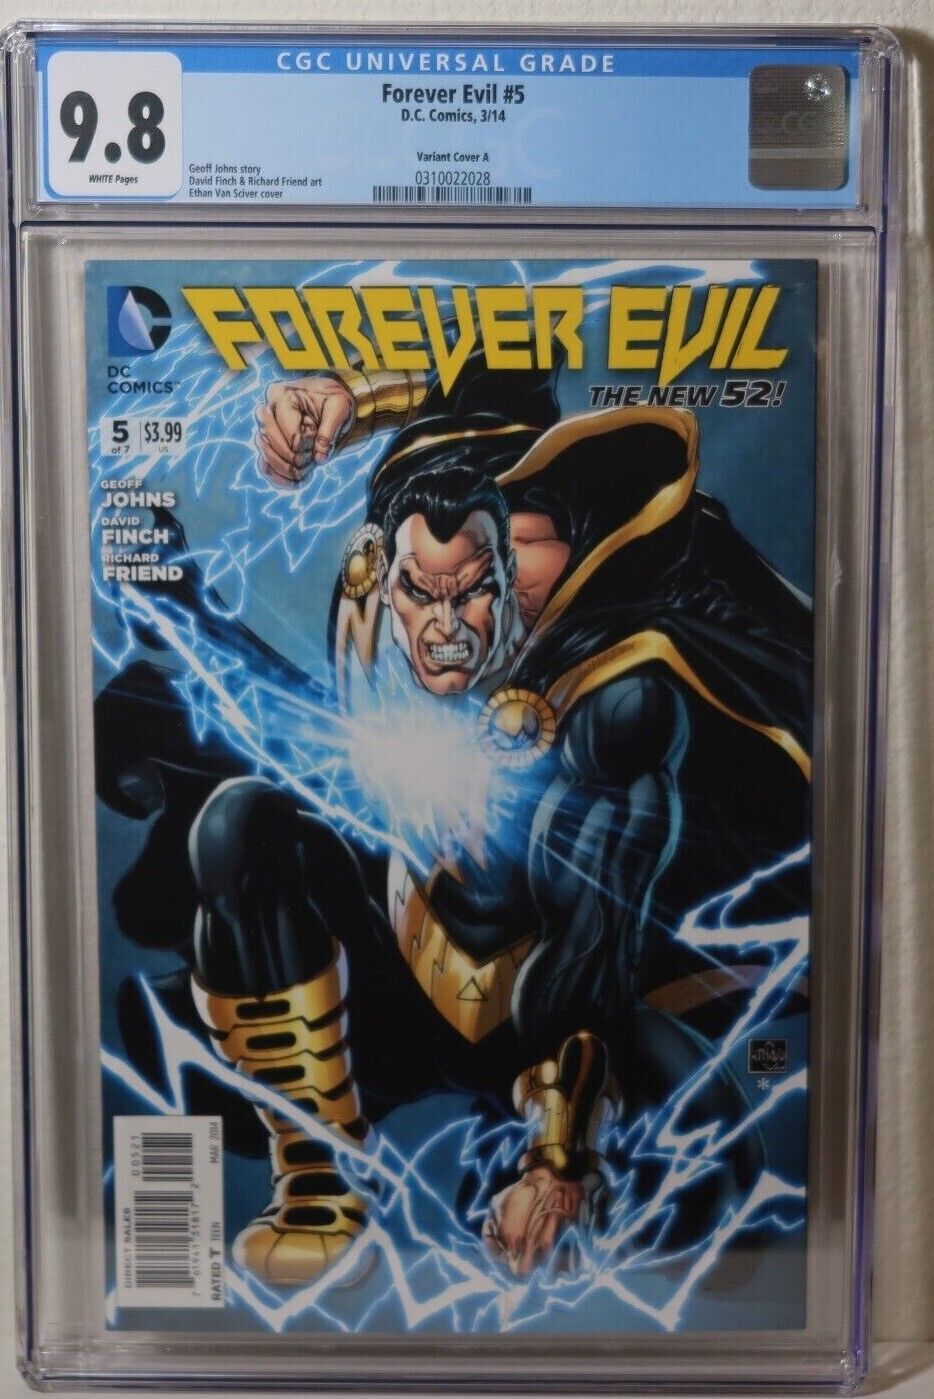 Forever Evil #5 BLACK ADAM VARIANT COVER [2014] CGC 9.8 NM RARE AND HARD TO FIND